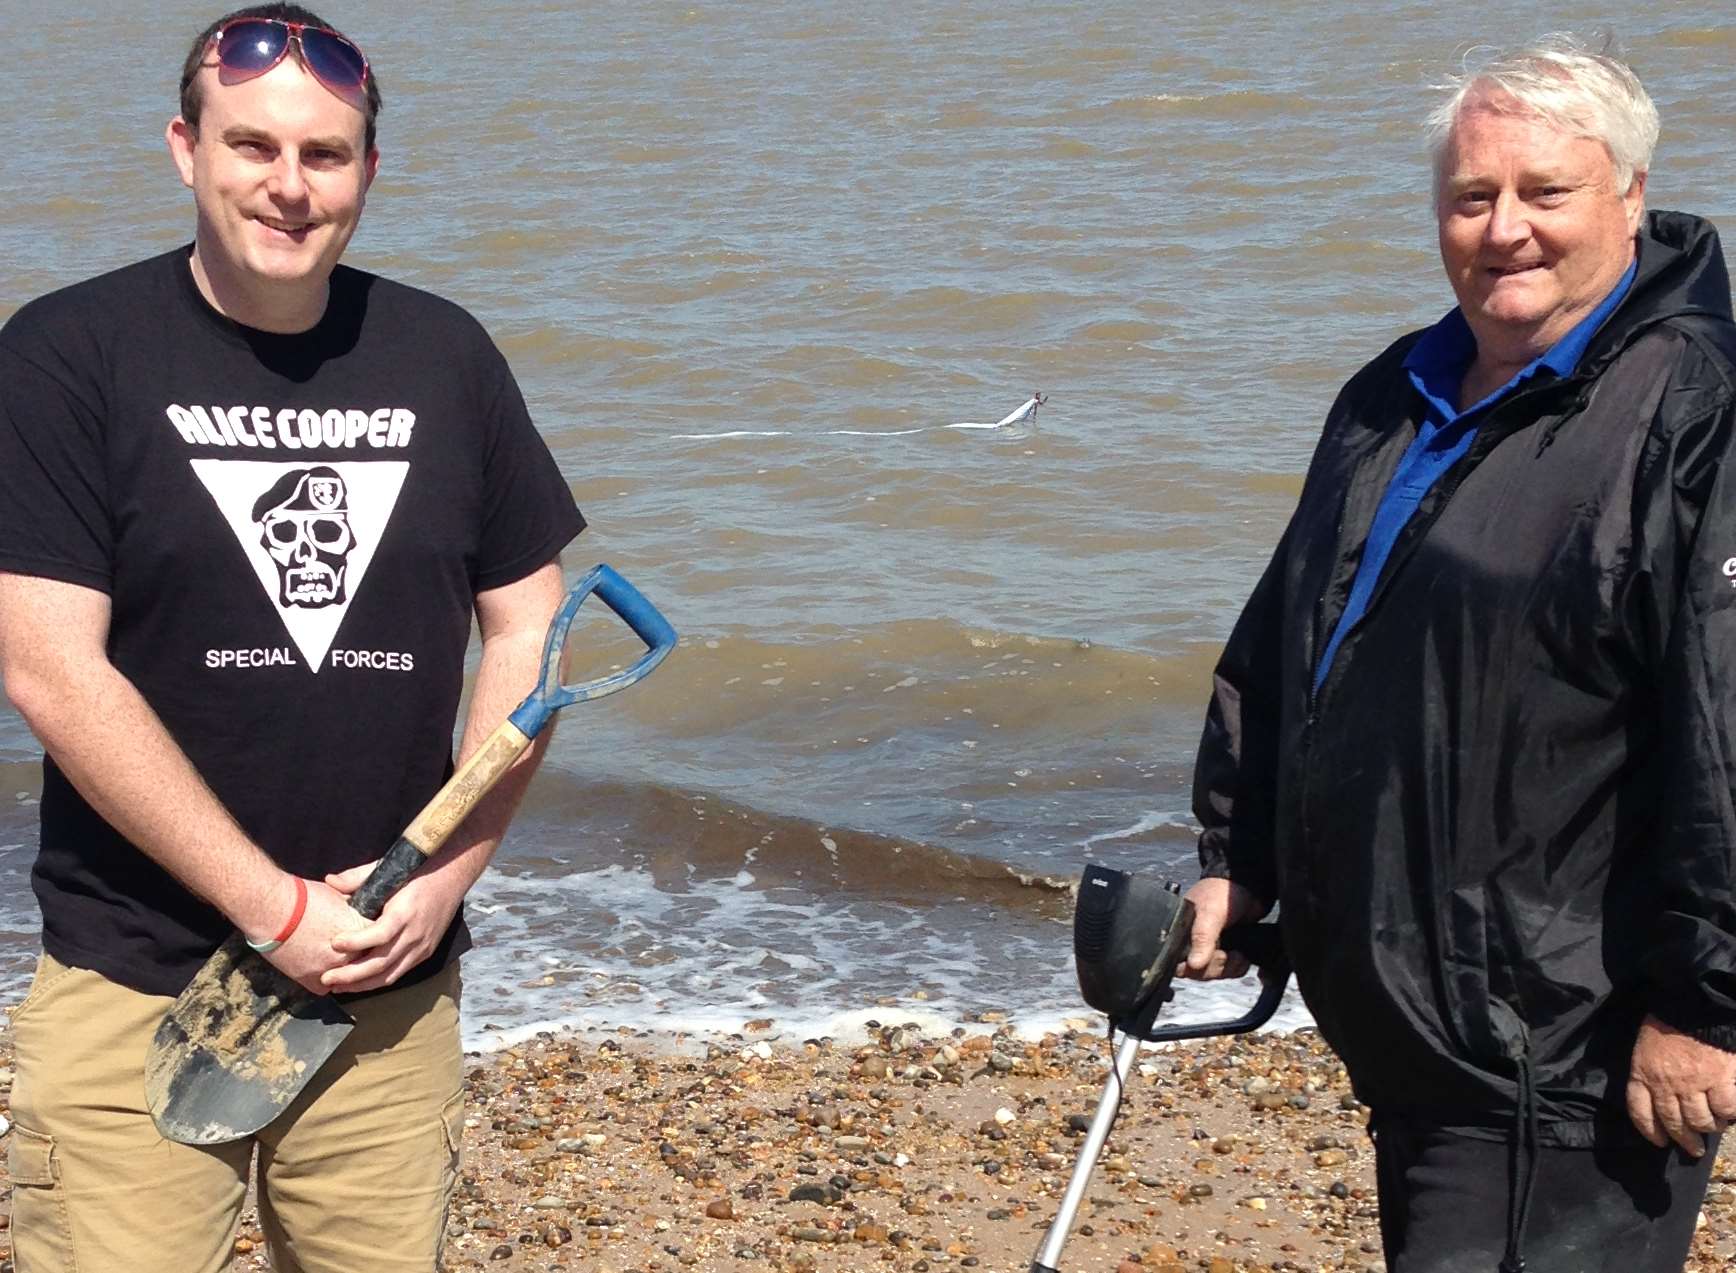 Alan Underdown and his son Gary, who also found a device